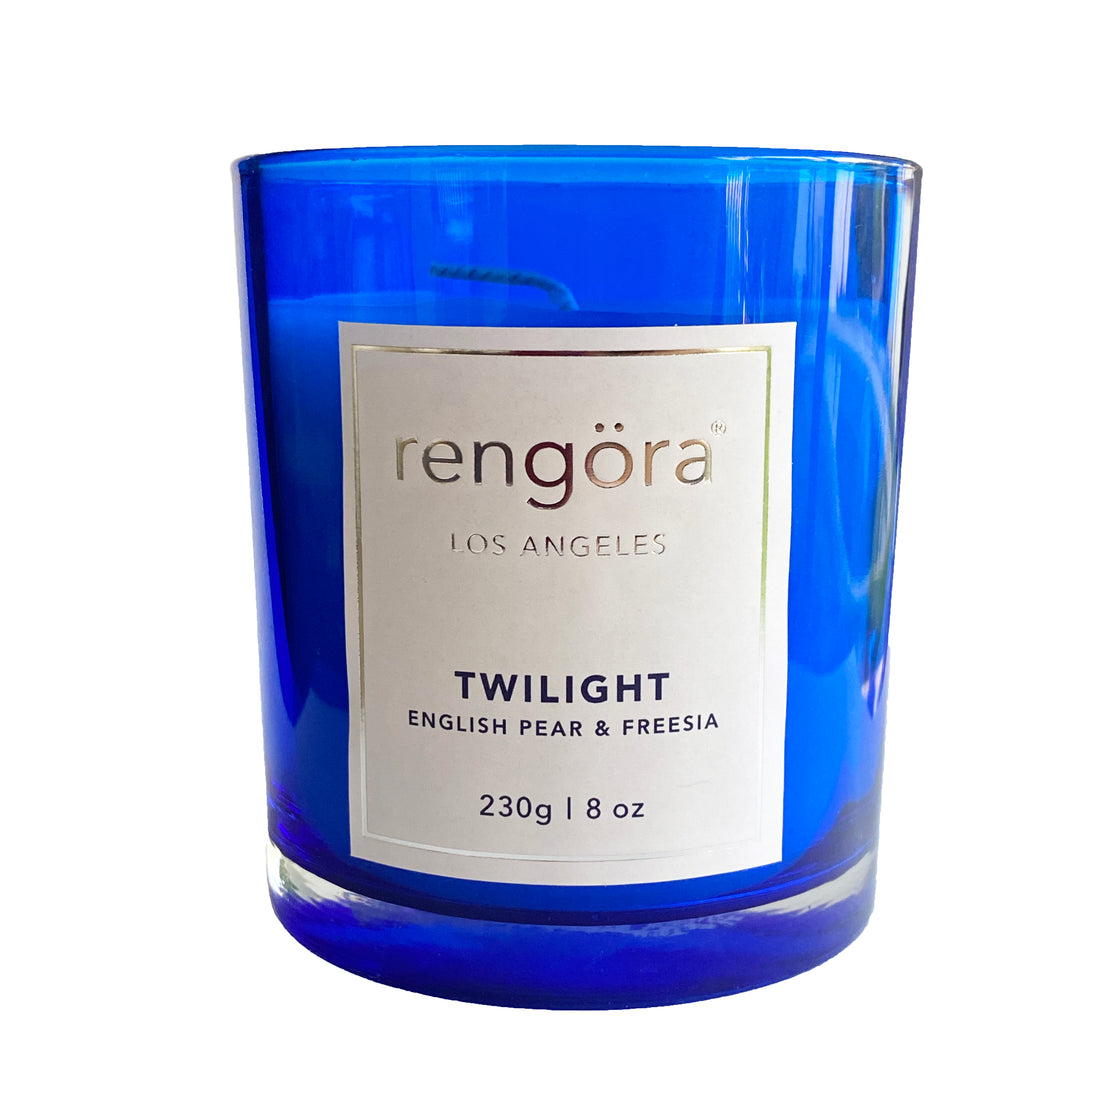 rengöra's Twilight scented home candle, featuring English pear and freesia in an exquisite cobalt blue glass set against a clean white background